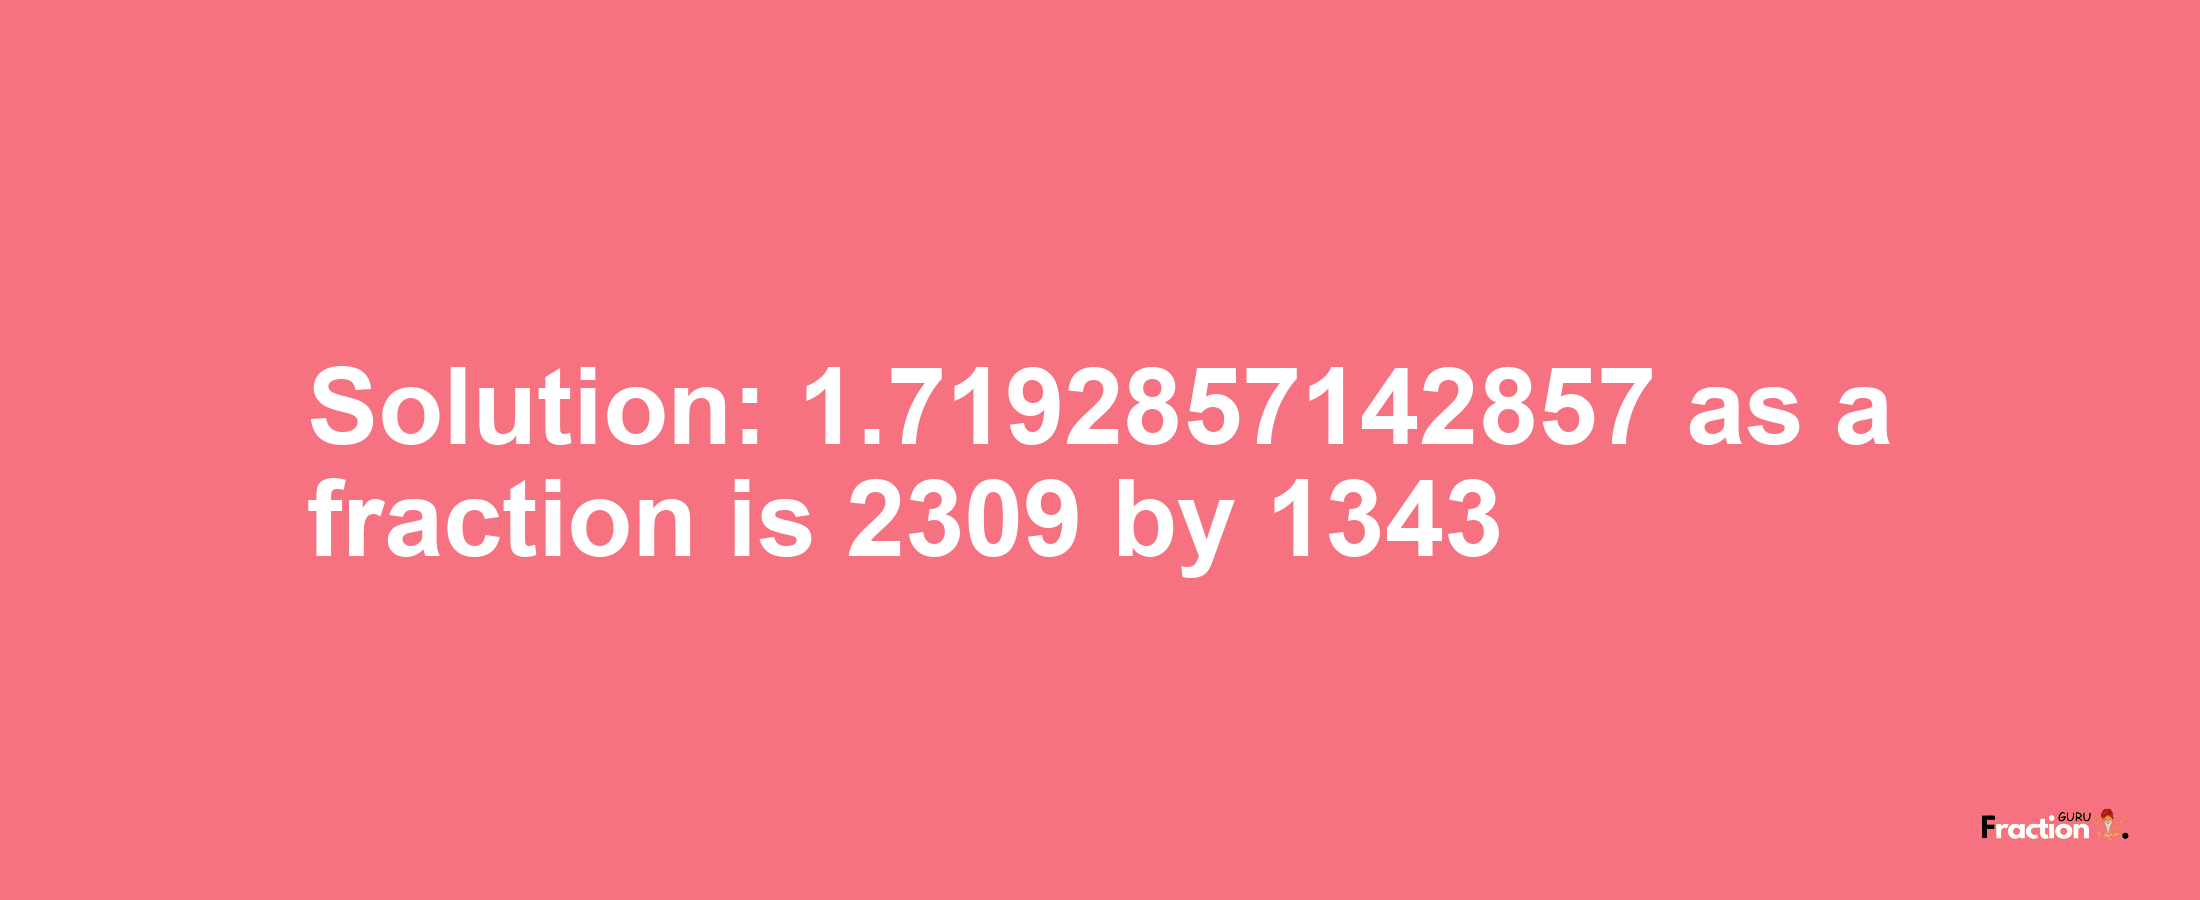 Solution:1.7192857142857 as a fraction is 2309/1343